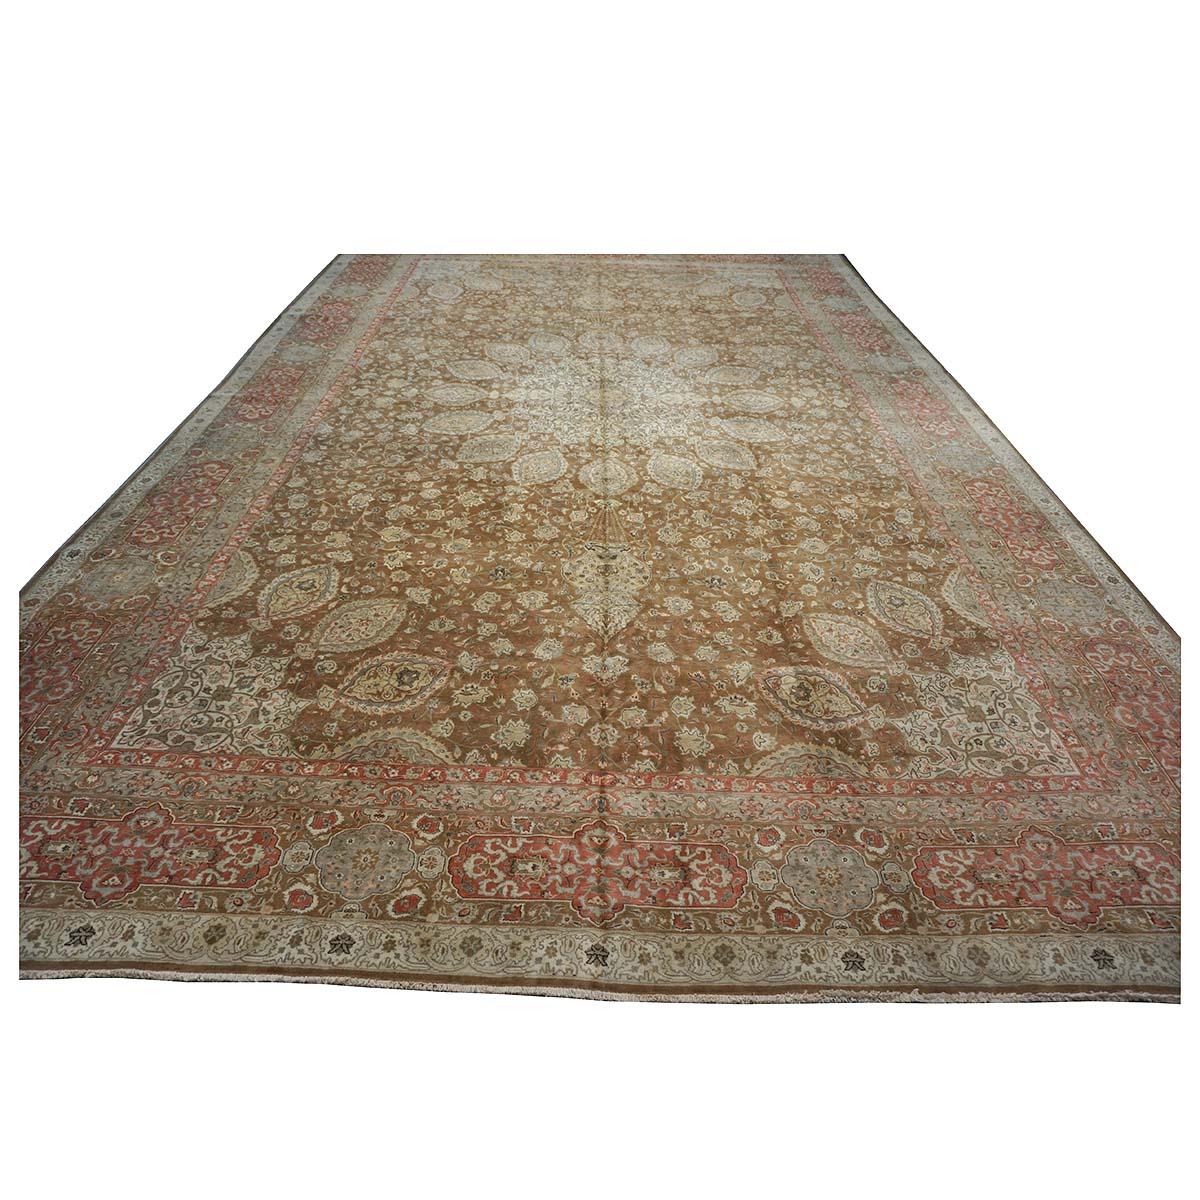 Hand-Woven Antique 1930s Persian Tabriz 13x20 Brown & Salmon Oversized Handmade Area Rug For Sale